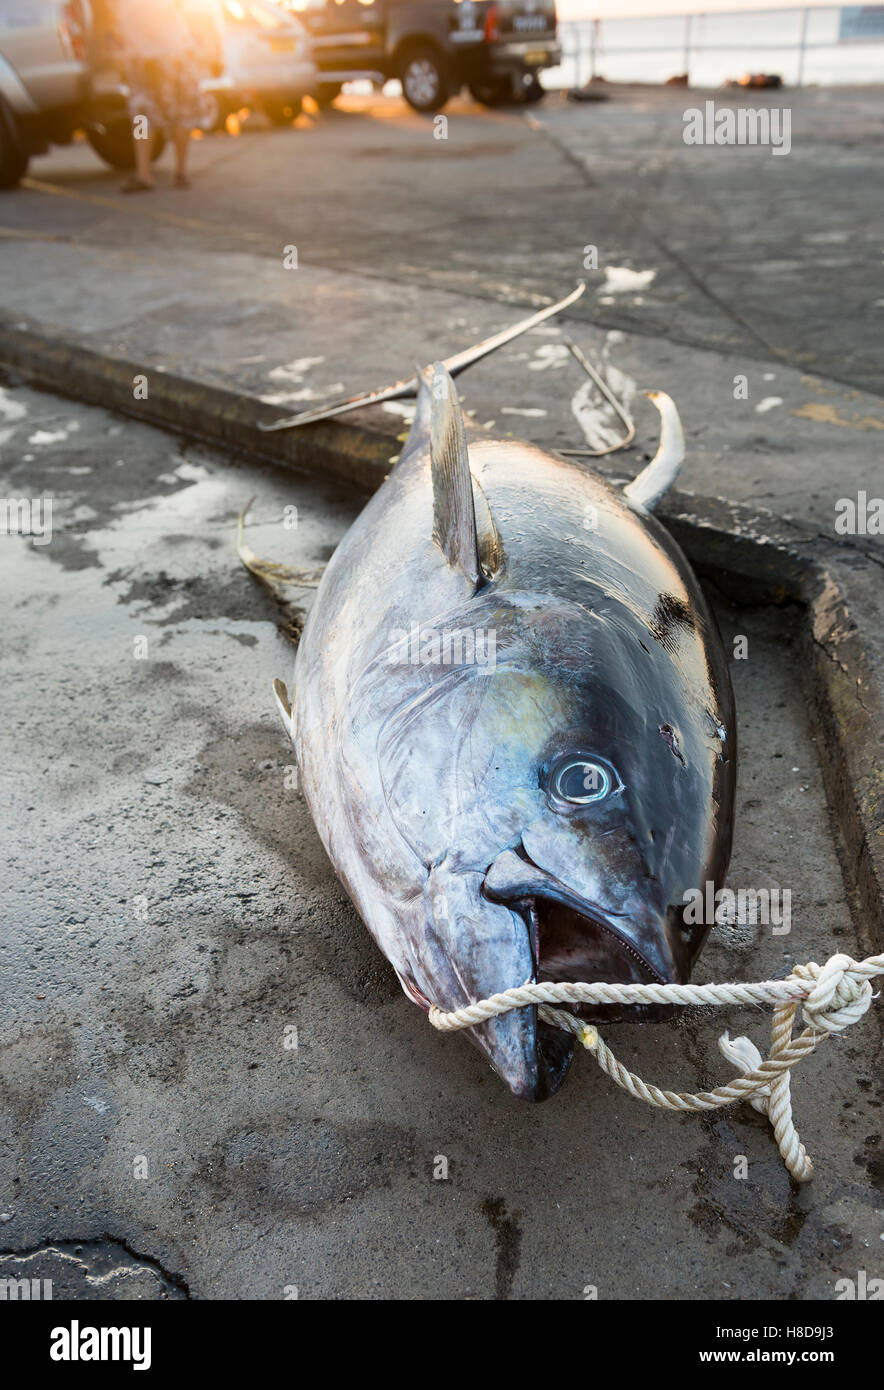 Ascension island wharf, fresh landed yellow fin tuna which has been caught by Freedivers spearfishing Stock Photo